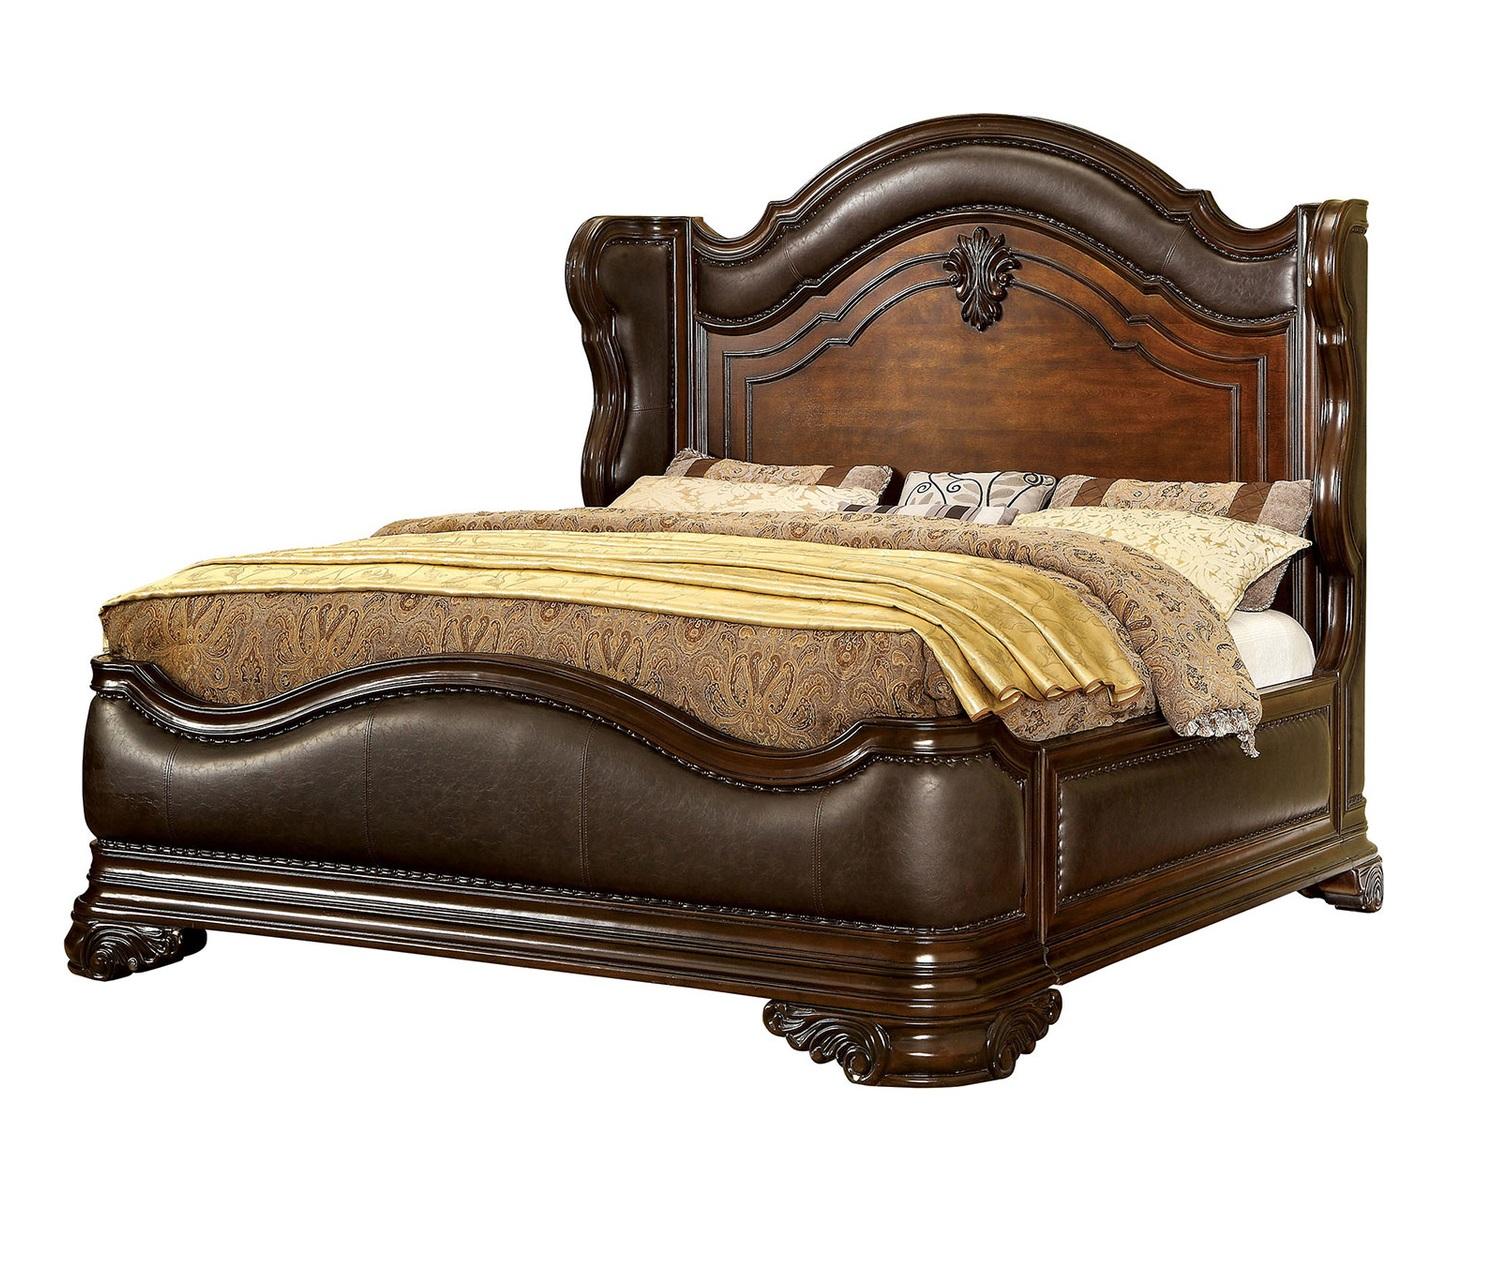 

    
Traditional Brown Cherry Solid Wood CAL Bedroom Set 3pcs Furniture of America CM7859 Arcturus
